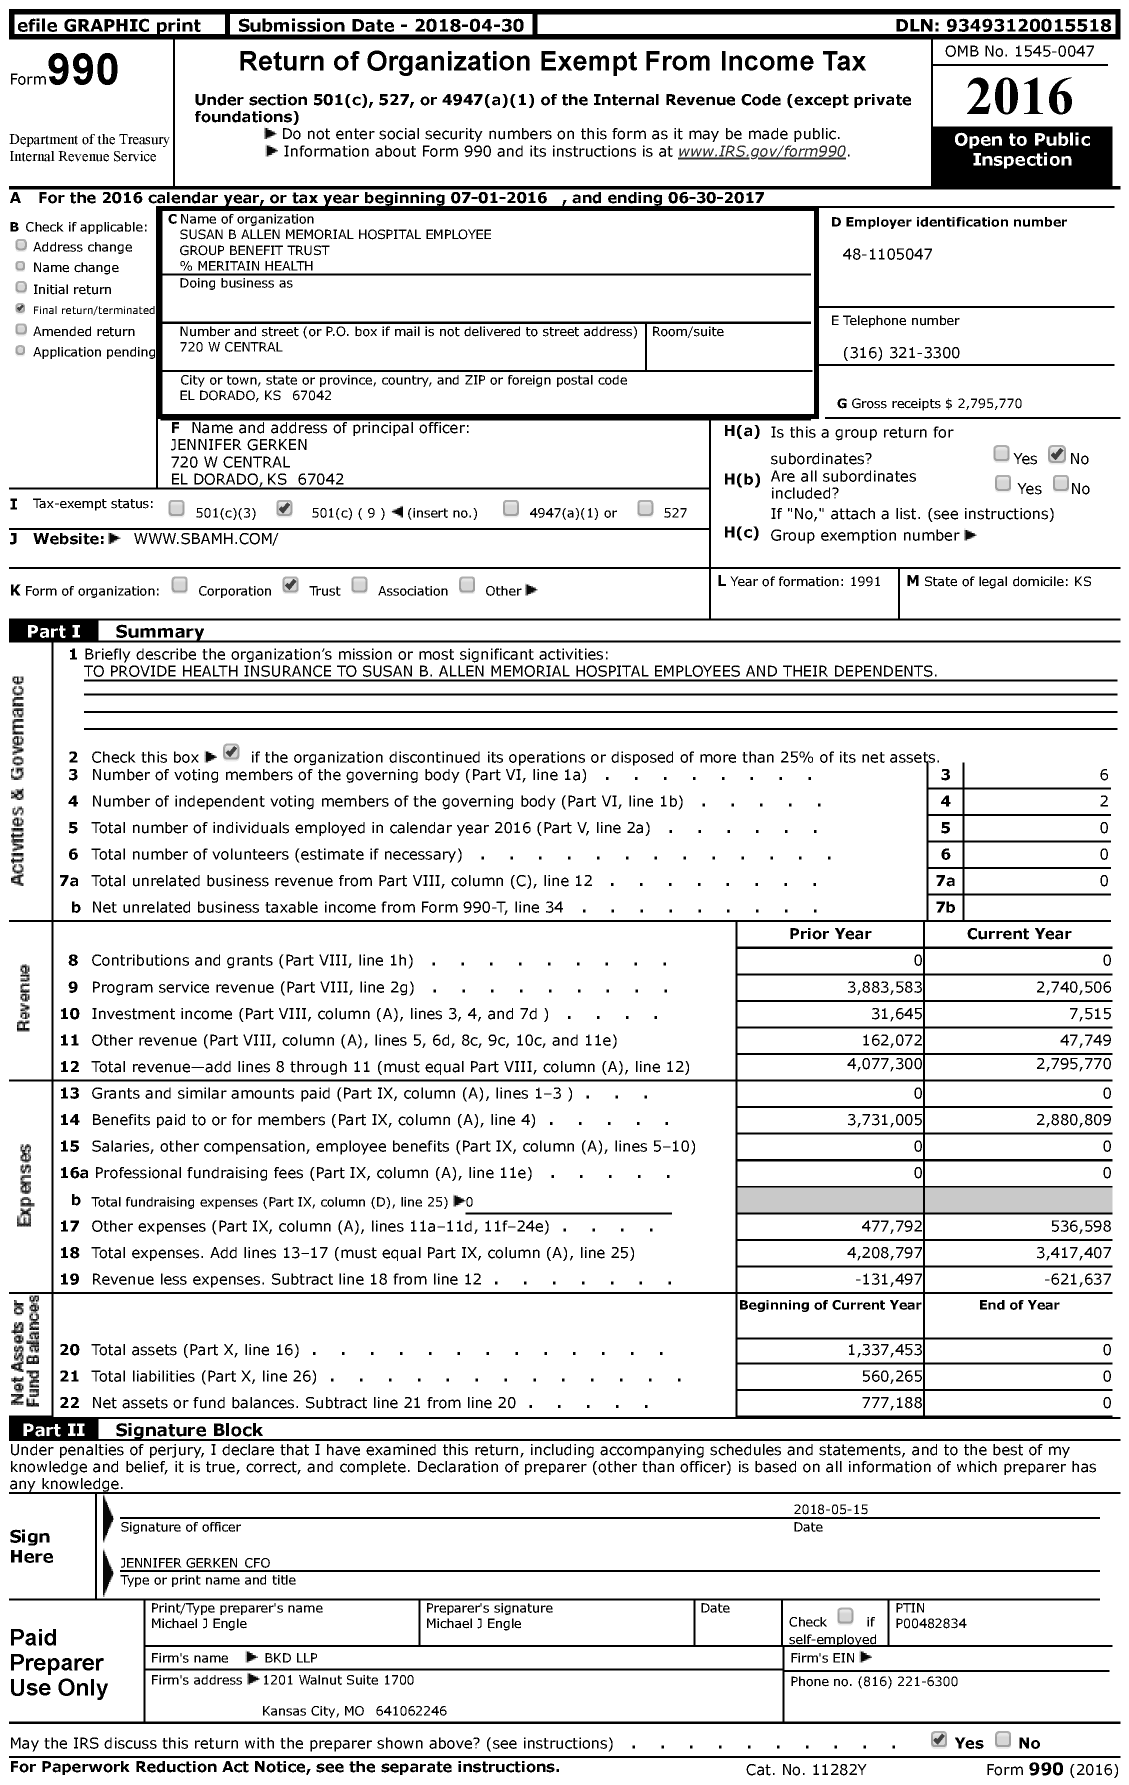 Image of first page of 2016 Form 990 for Susan B Allen Memorial Hospital Employee Group Benefit Trust